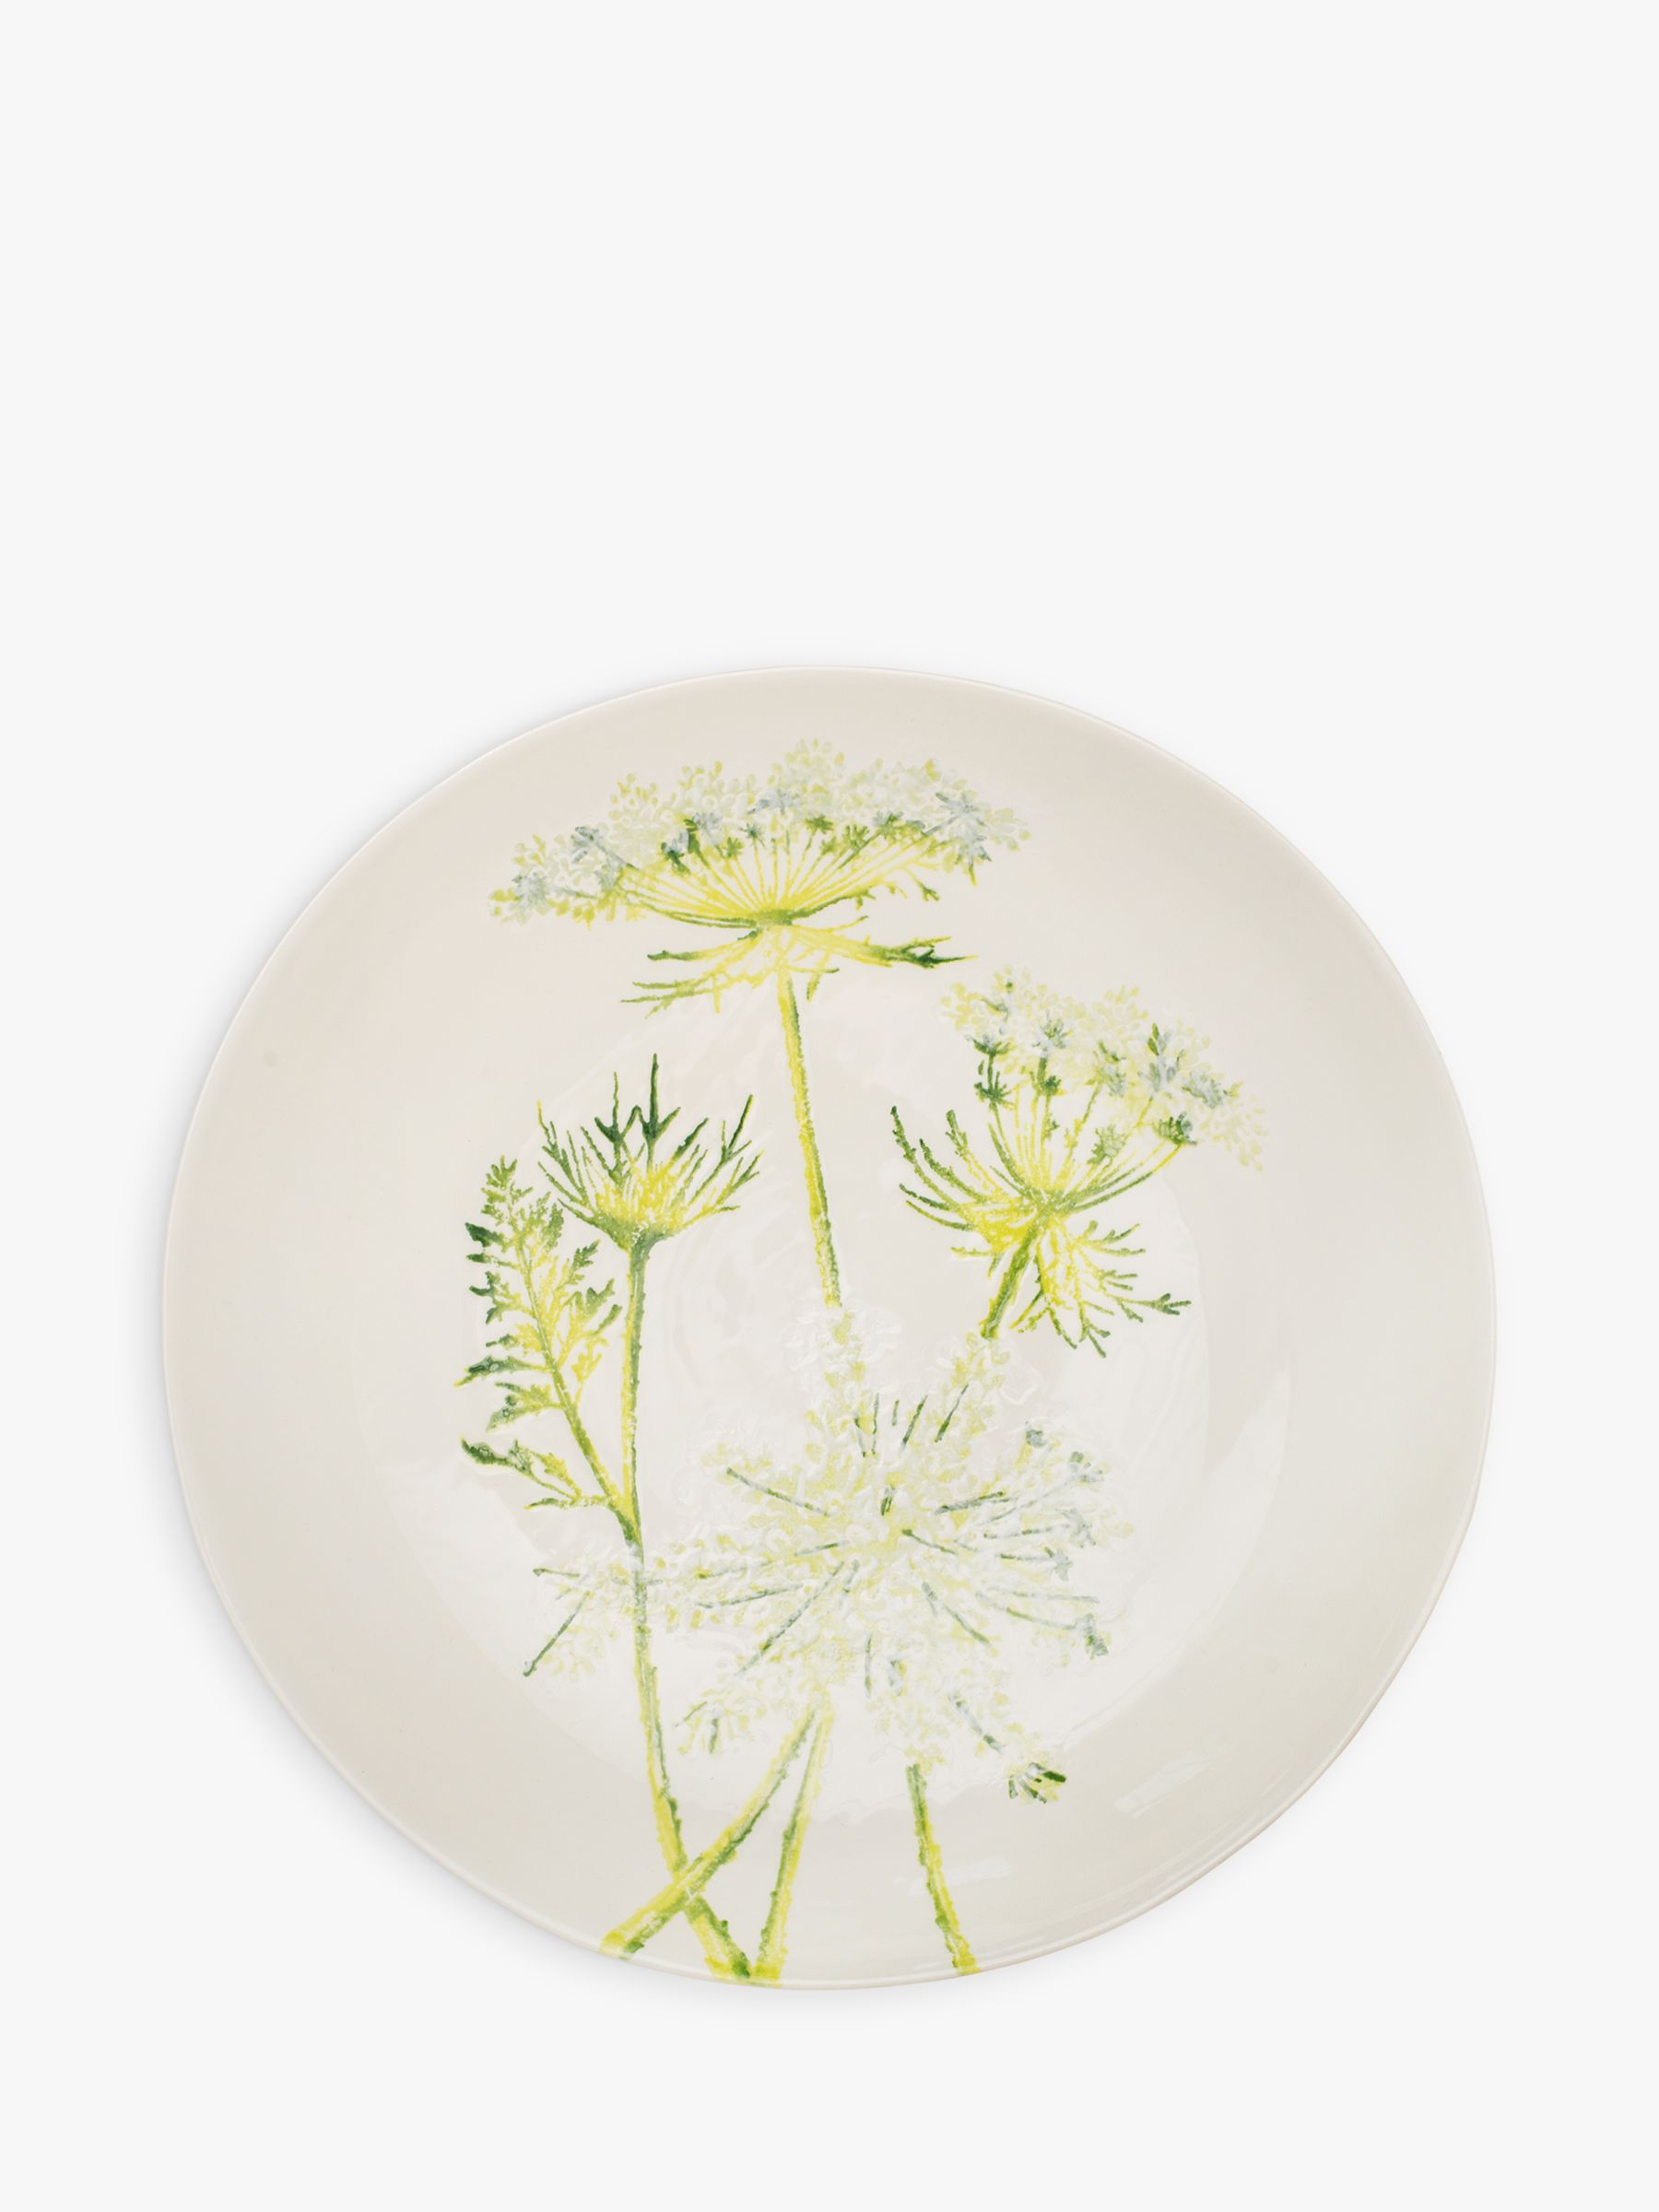 BlissHome Cow Parsley Large Earthenware Serving Bowl, 39cm, Green